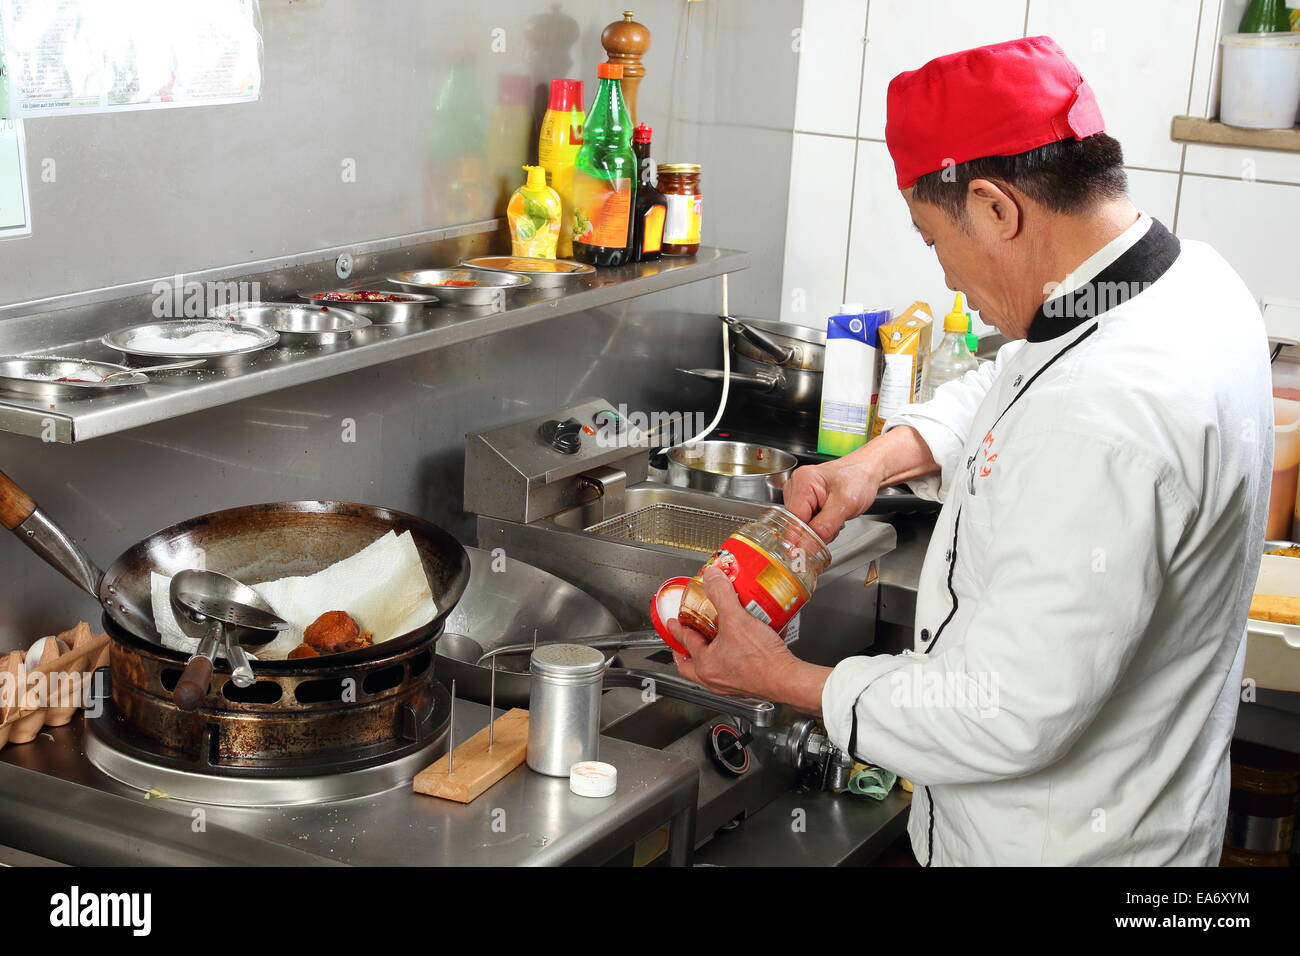 A Asian cook putting spices while cooking Stock Photo